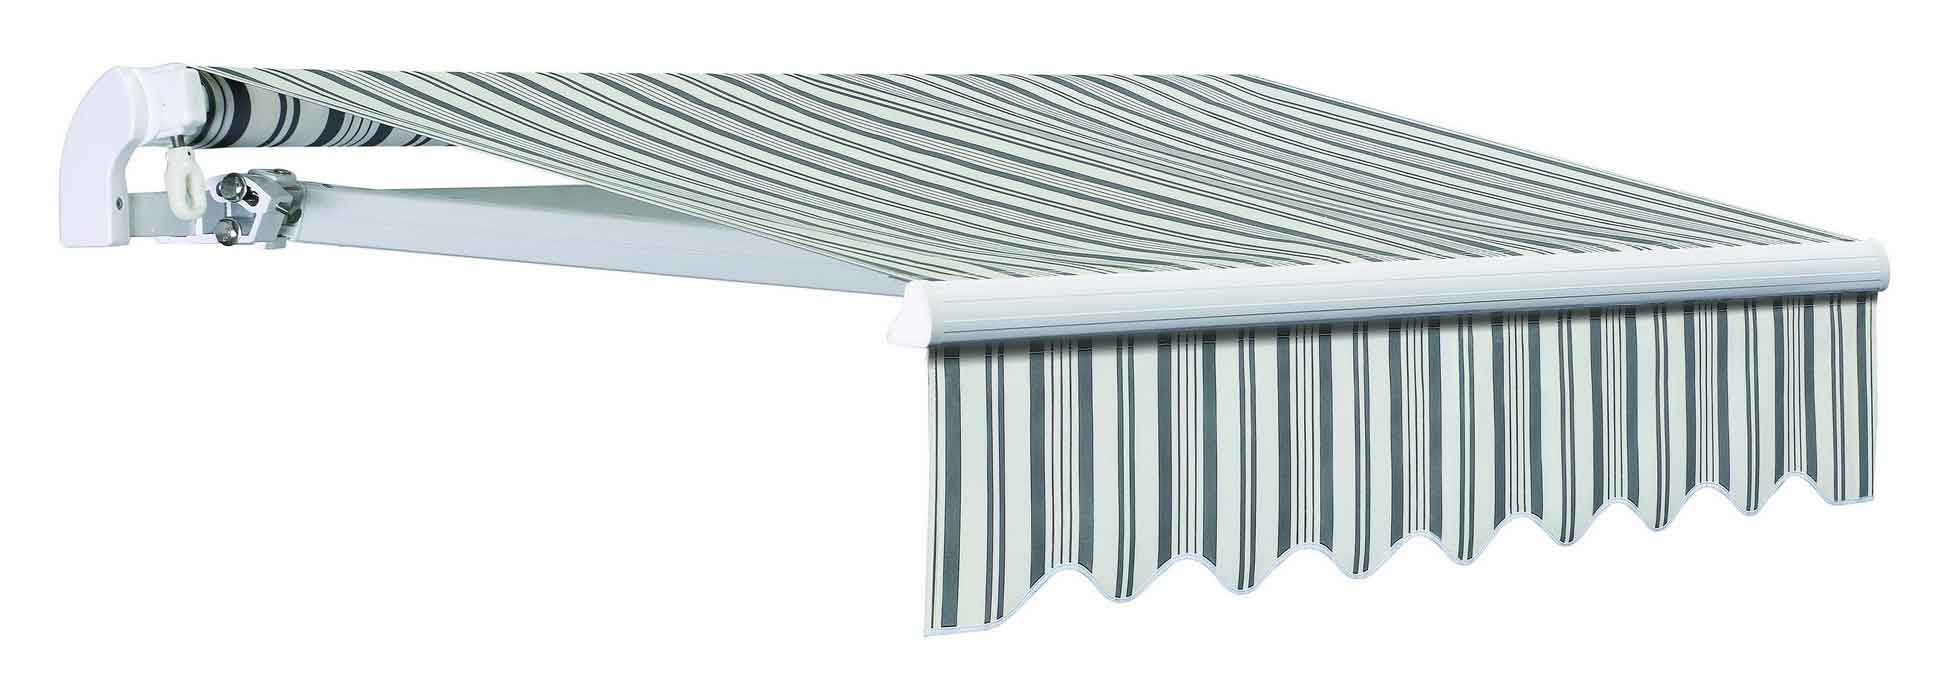 AWNING BW12000 RETRACTABLE ROLLER 3.95X3M STRIPE